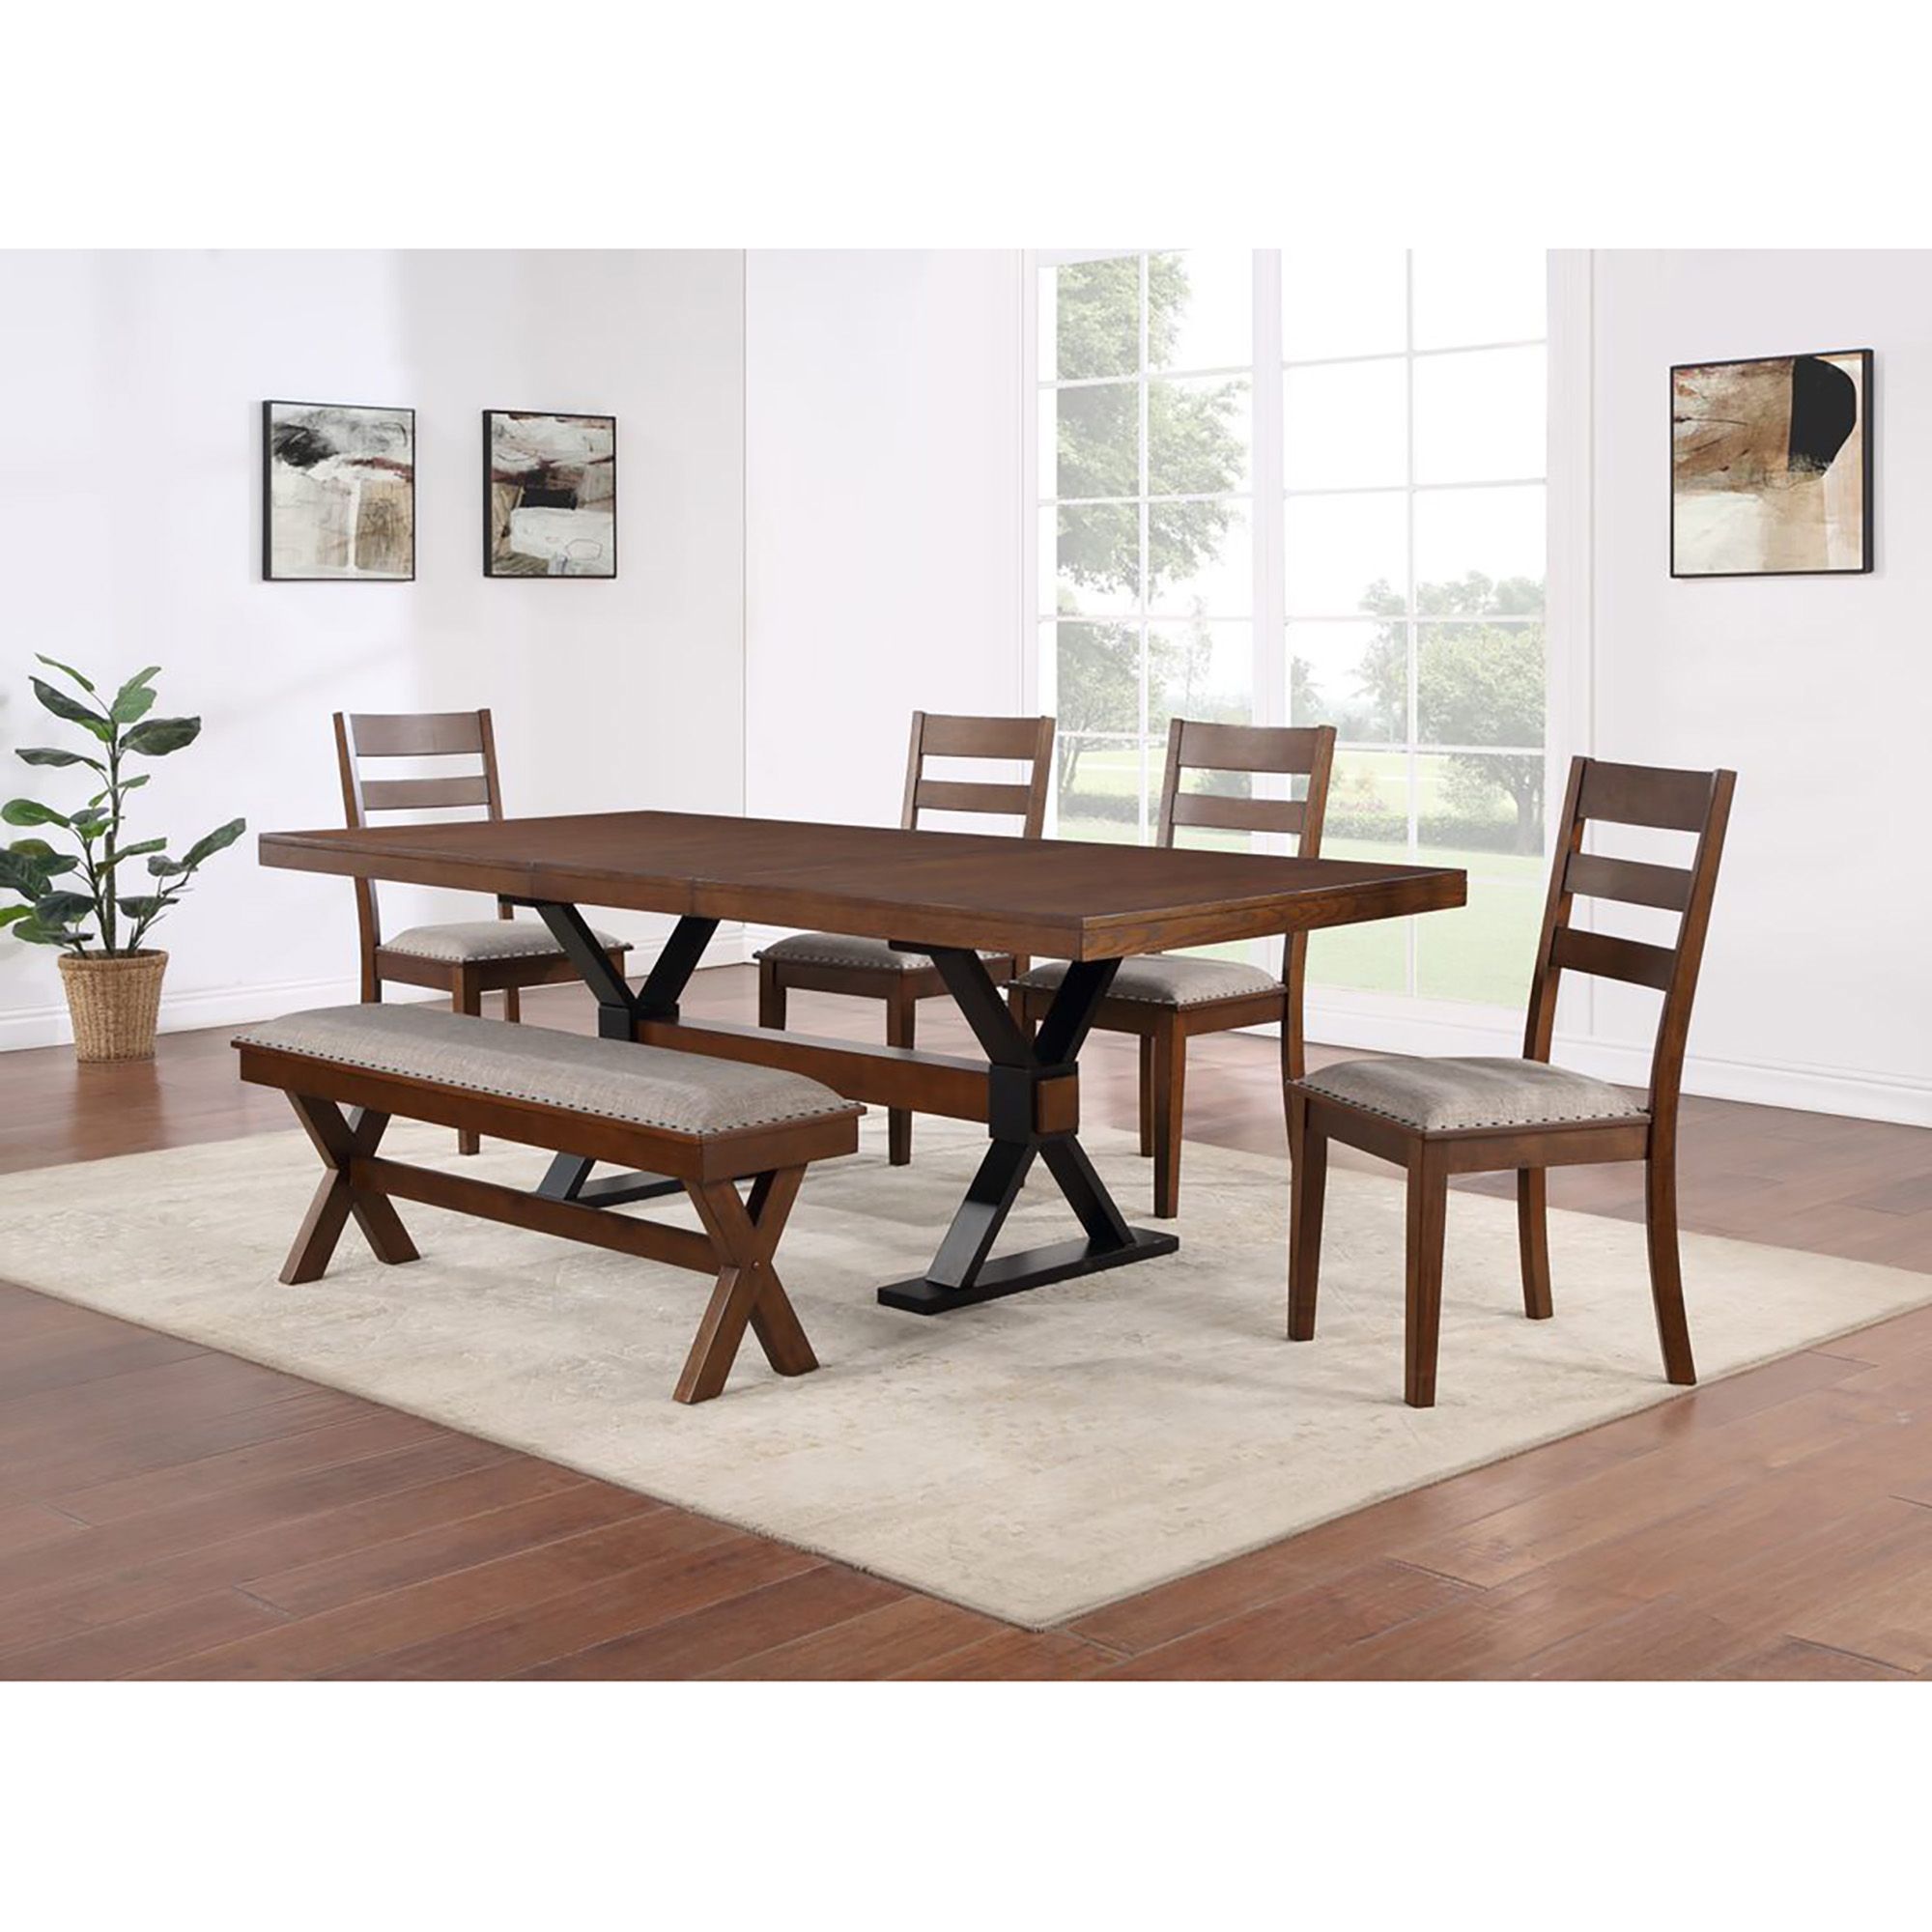 Home to Office 6-Pc. Dexter Dining Set